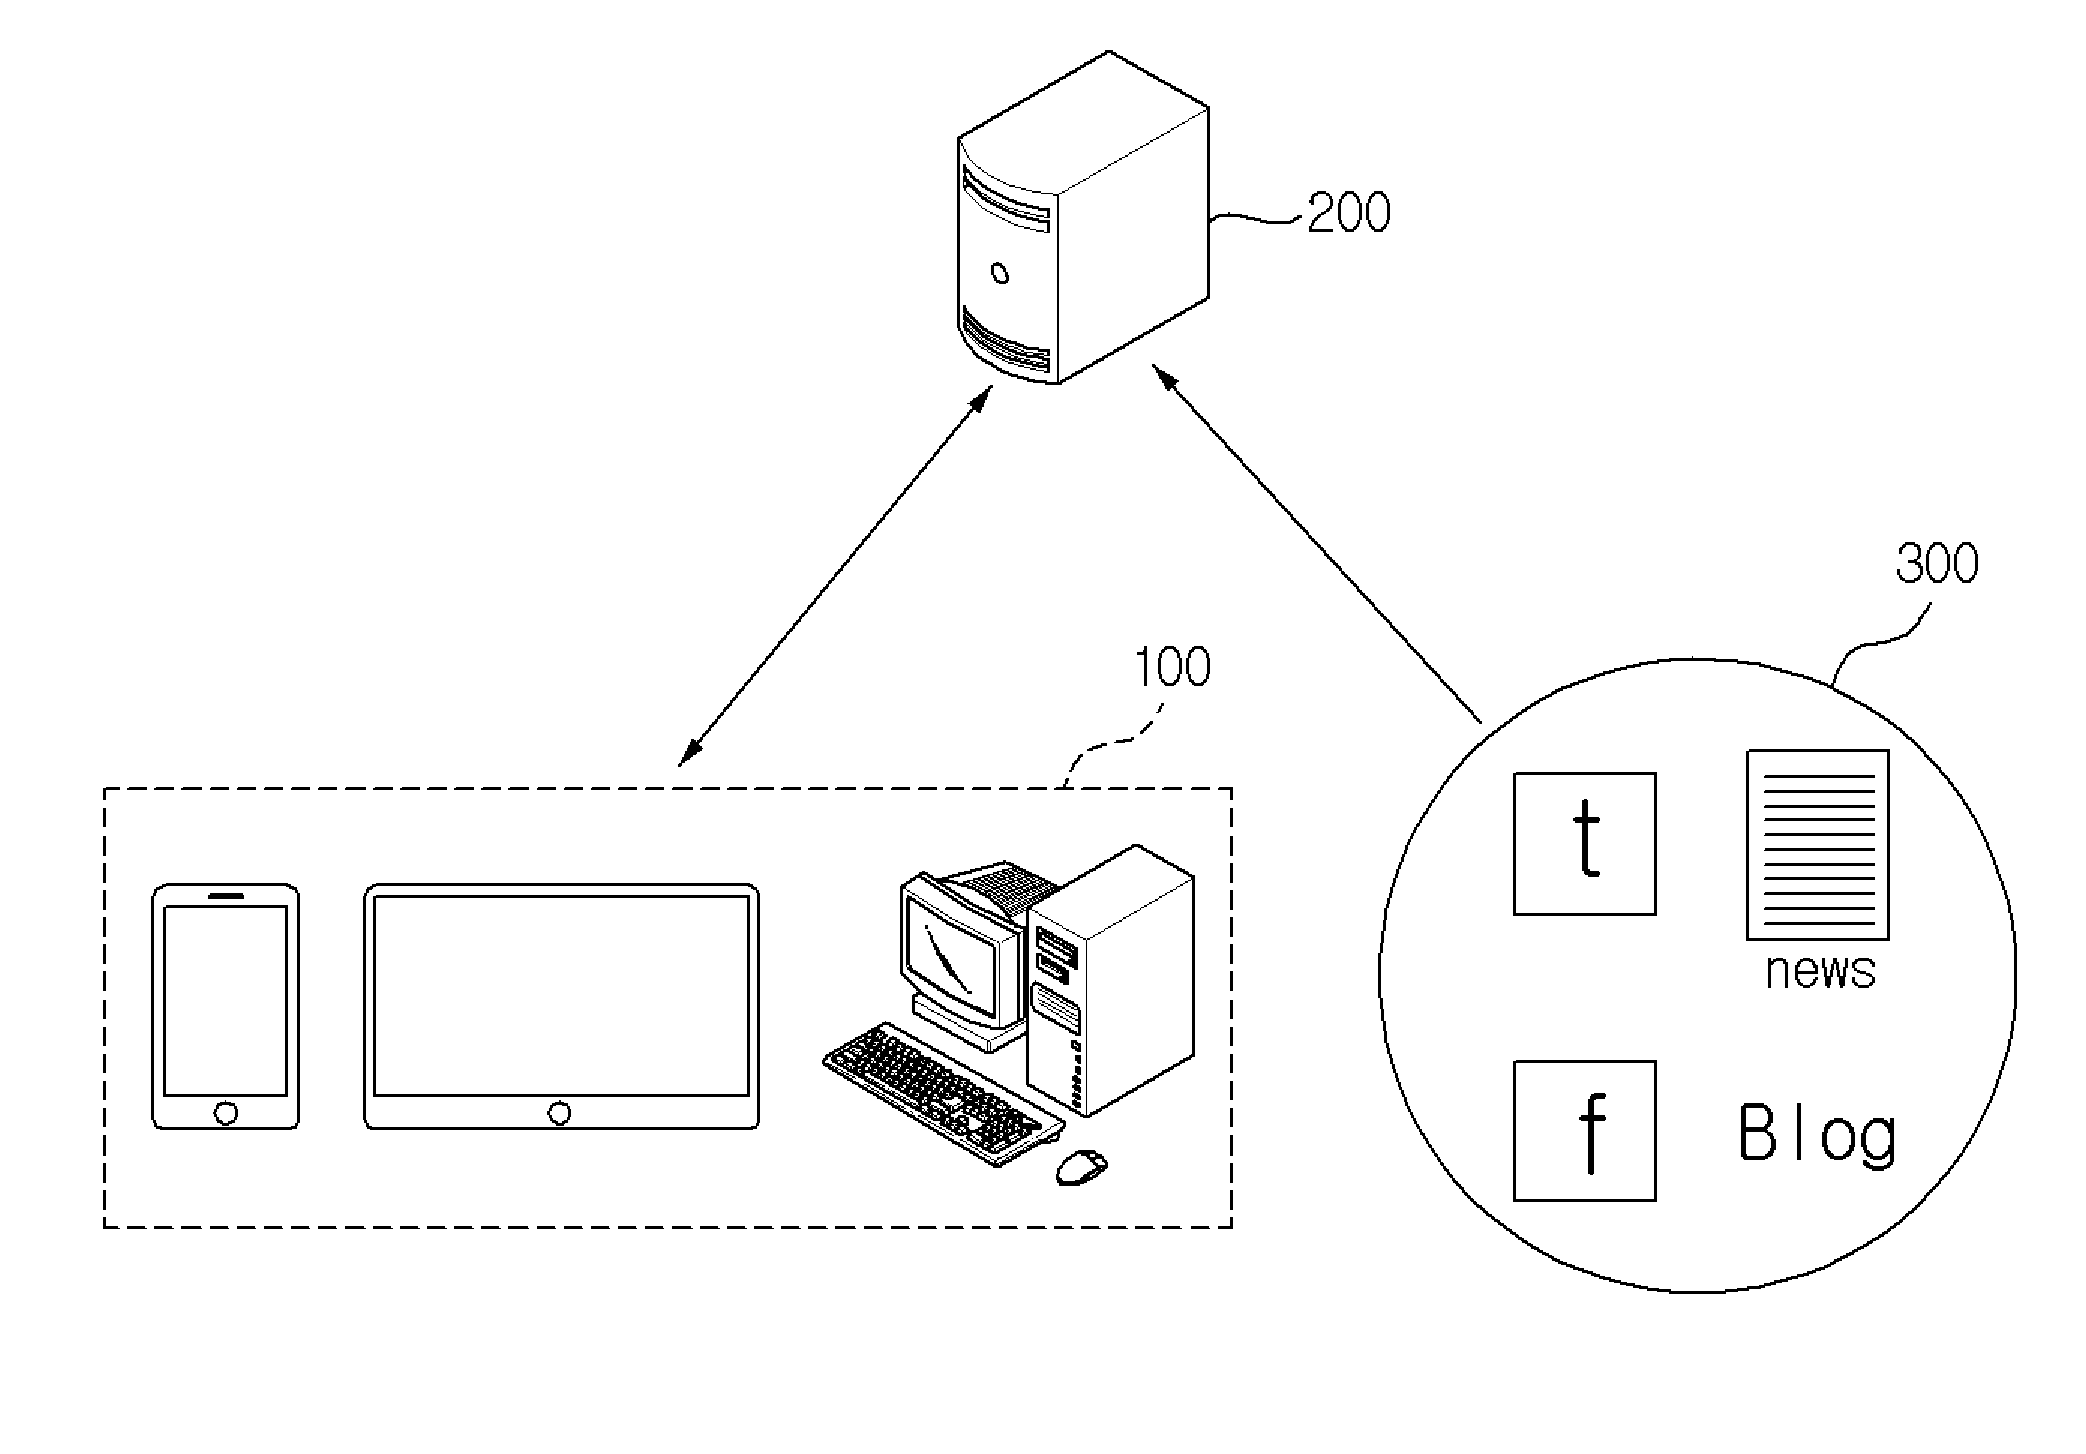 Apparatus and method for providing issue record, and generating issue record